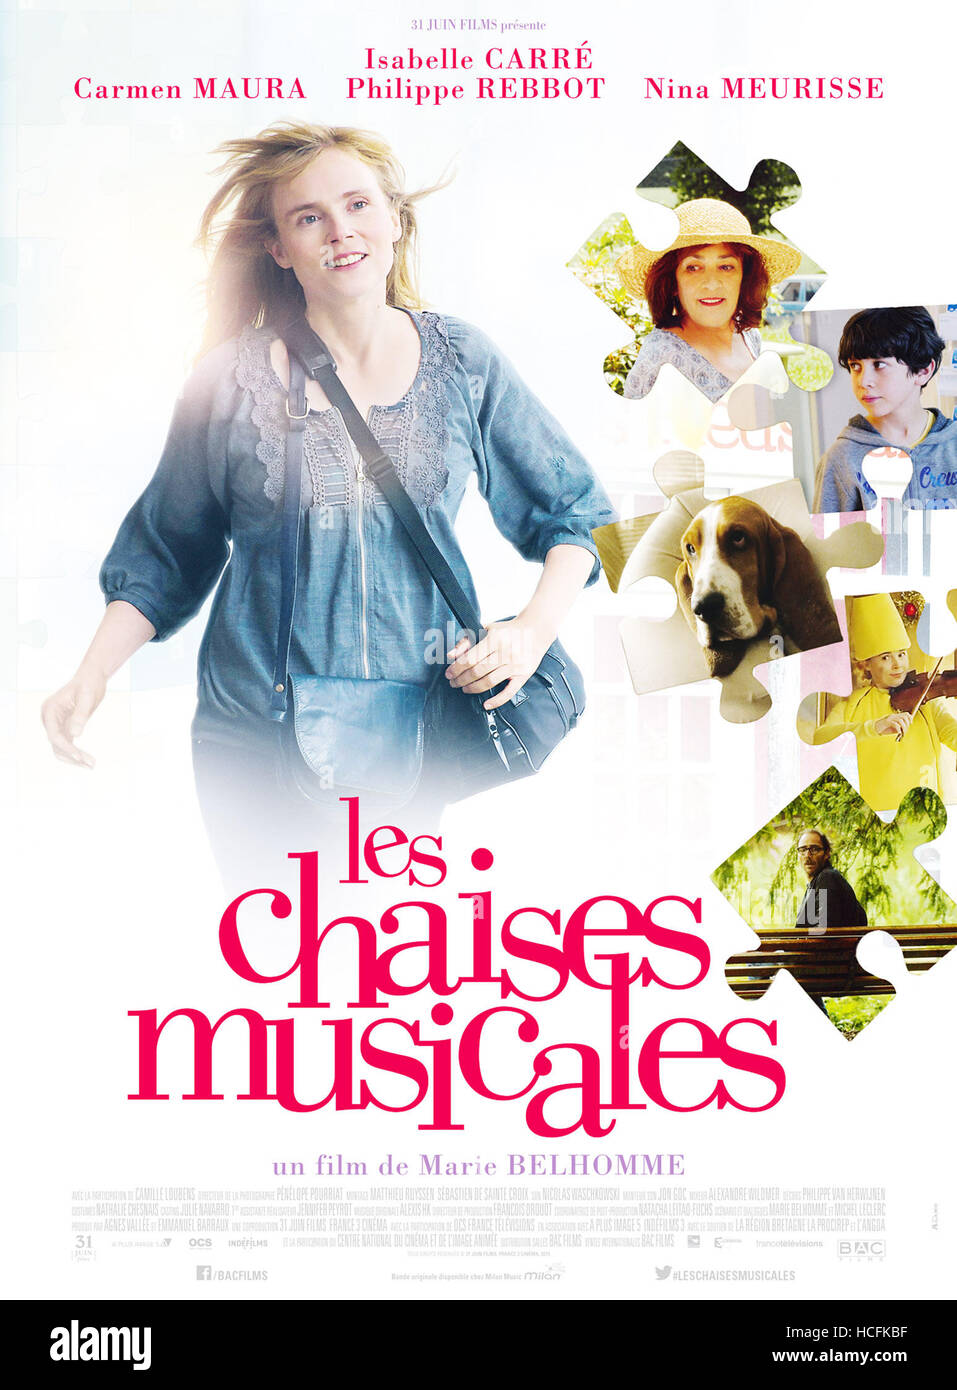 LES CHAISES MUSICALES, left: French poster, Isabelle Carre, right, from  top: Carmen Maura, Camille Loubens, Isabelle Carre Stock Photo - Alamy